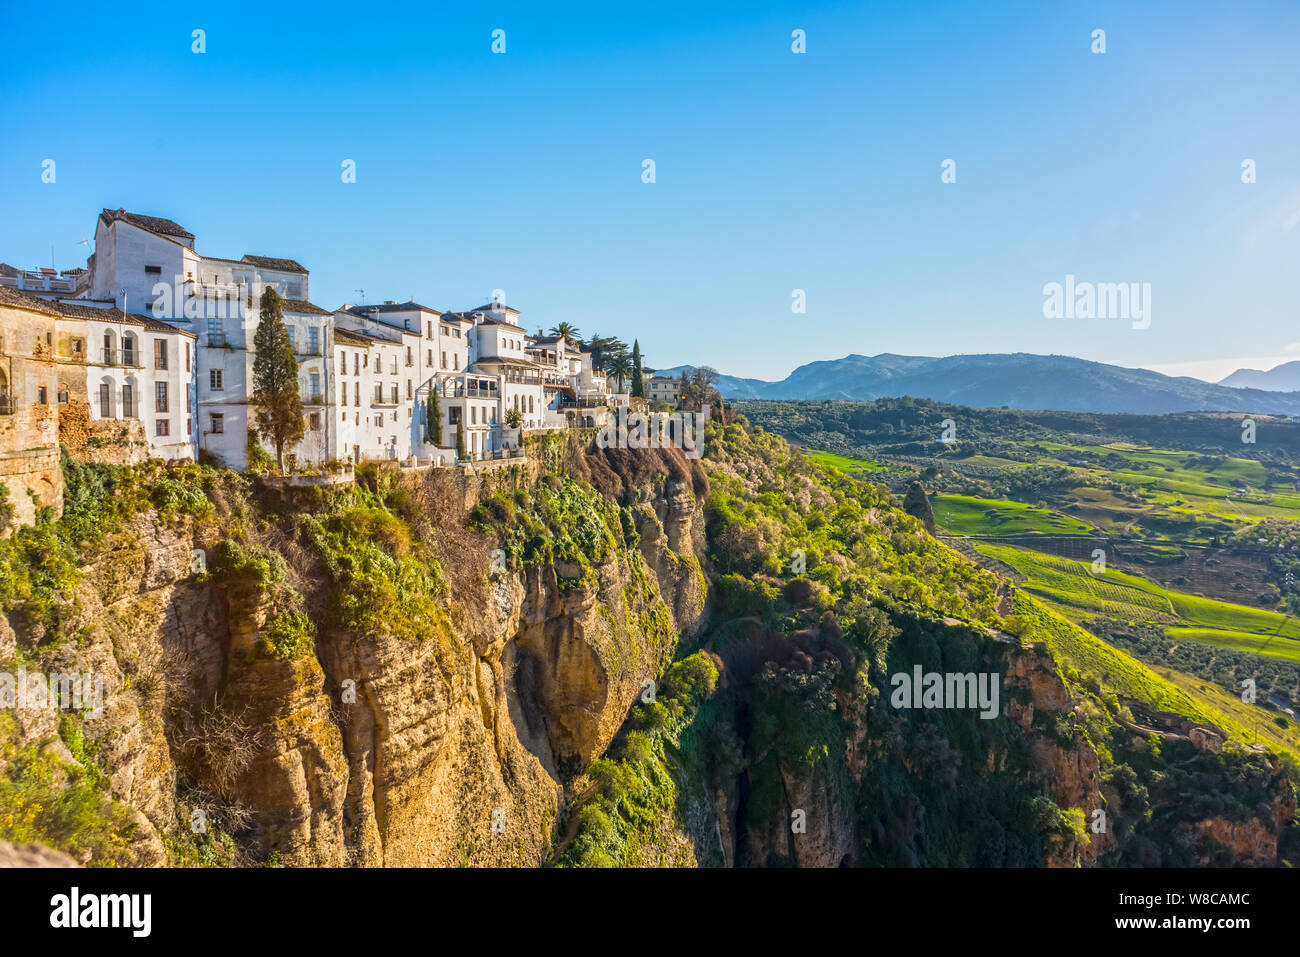 Ronda, Spain: Landscape of white houses on the green edges of steep cliffs with mountains in the background. Stock Photo